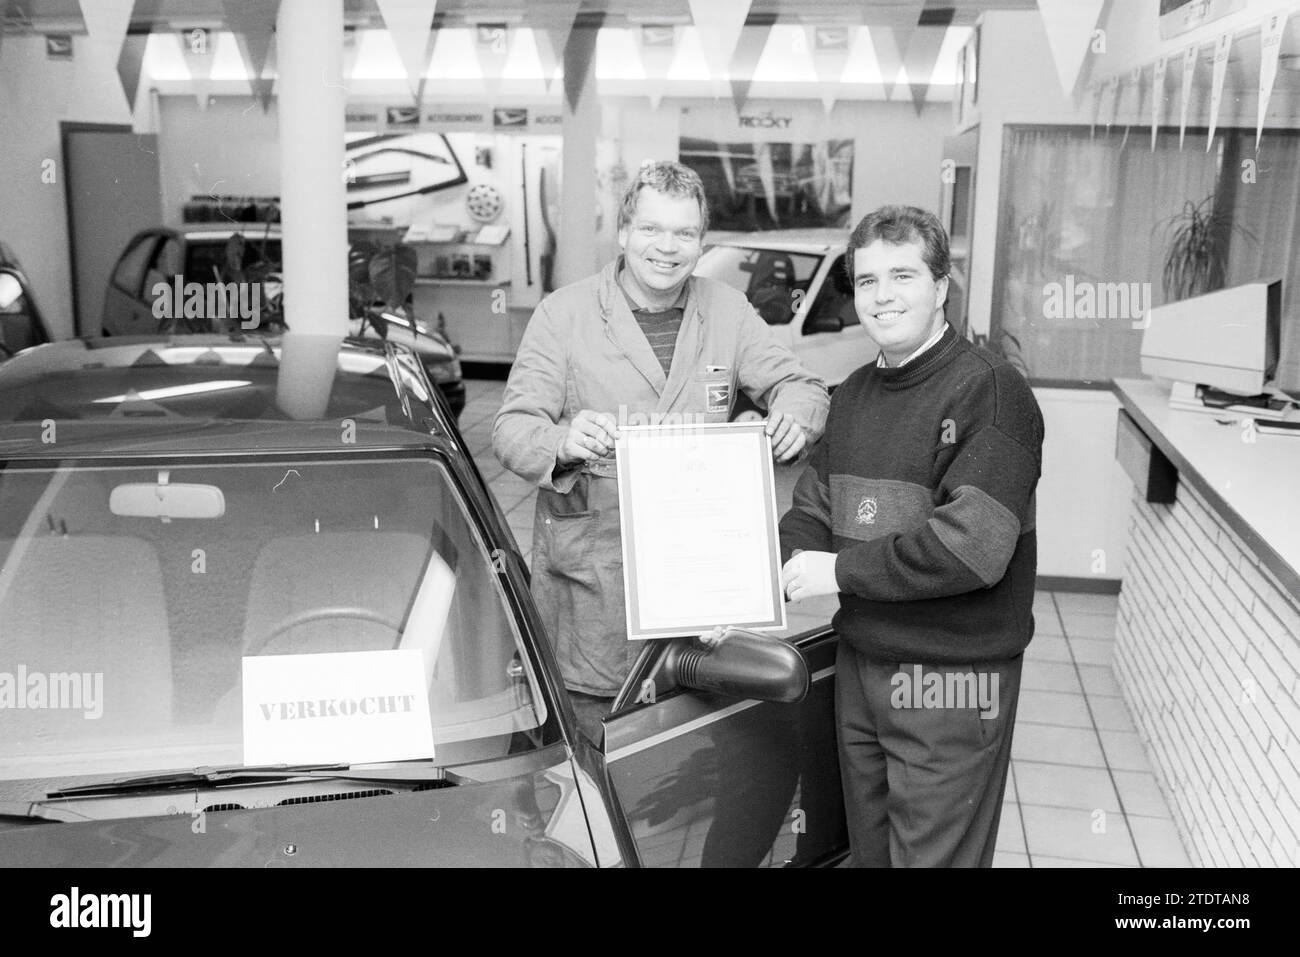 Daihatsu car dealer shows his certificate, 00-12-1989, Whizgle News from the Past, Tailored for the Future. Explore historical narratives, Dutch The Netherlands agency image with a modern perspective, bridging the gap between yesterday's events and tomorrow's insights. A timeless journey shaping the stories that shape our future Stock Photo